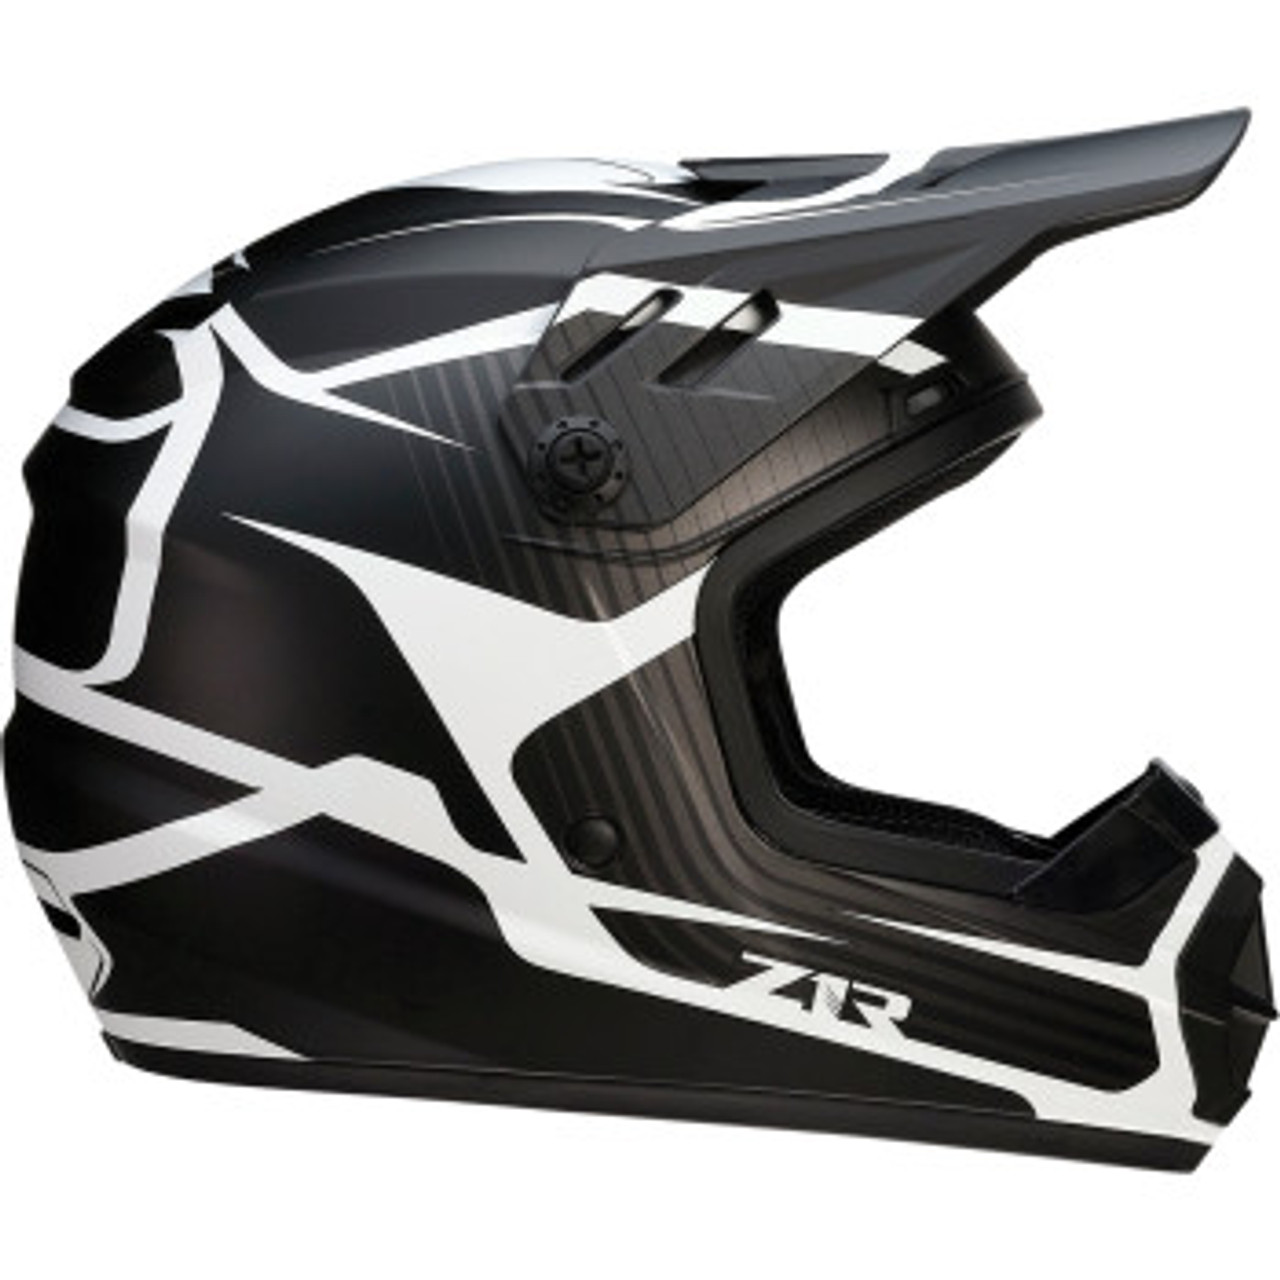 Z1R Youth Rise Helmet - Flame - Black - Large